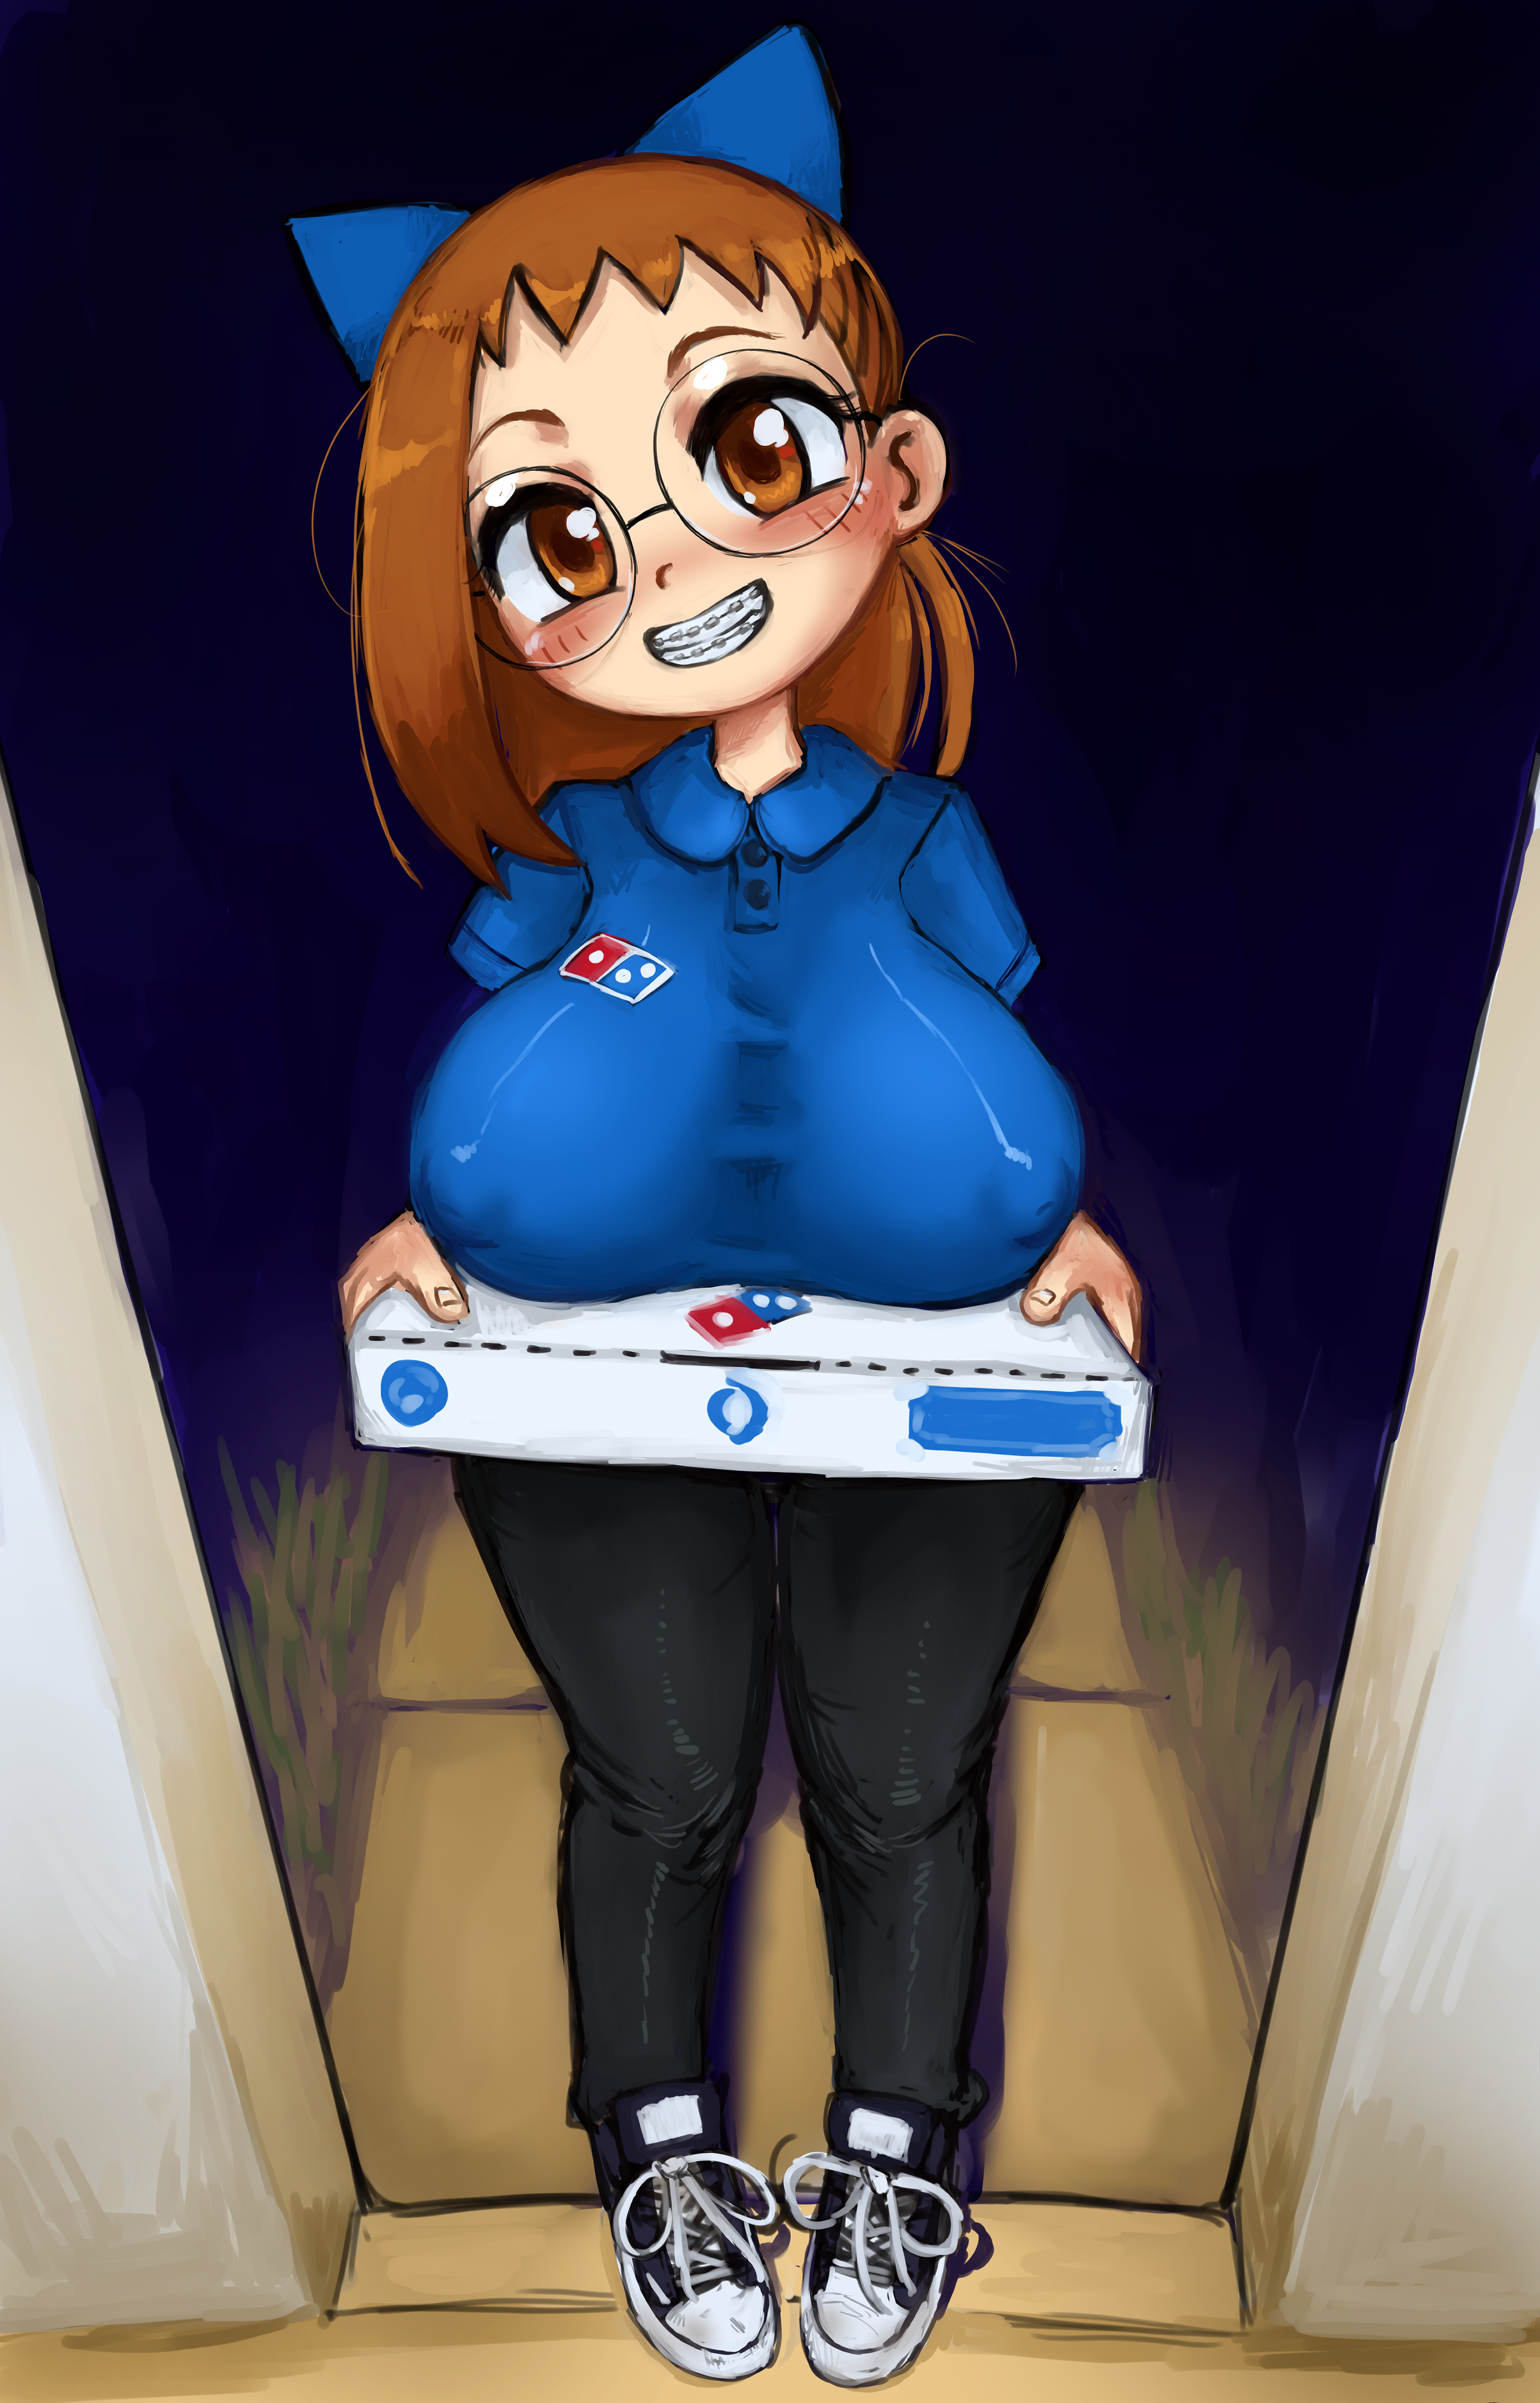 Dominos time